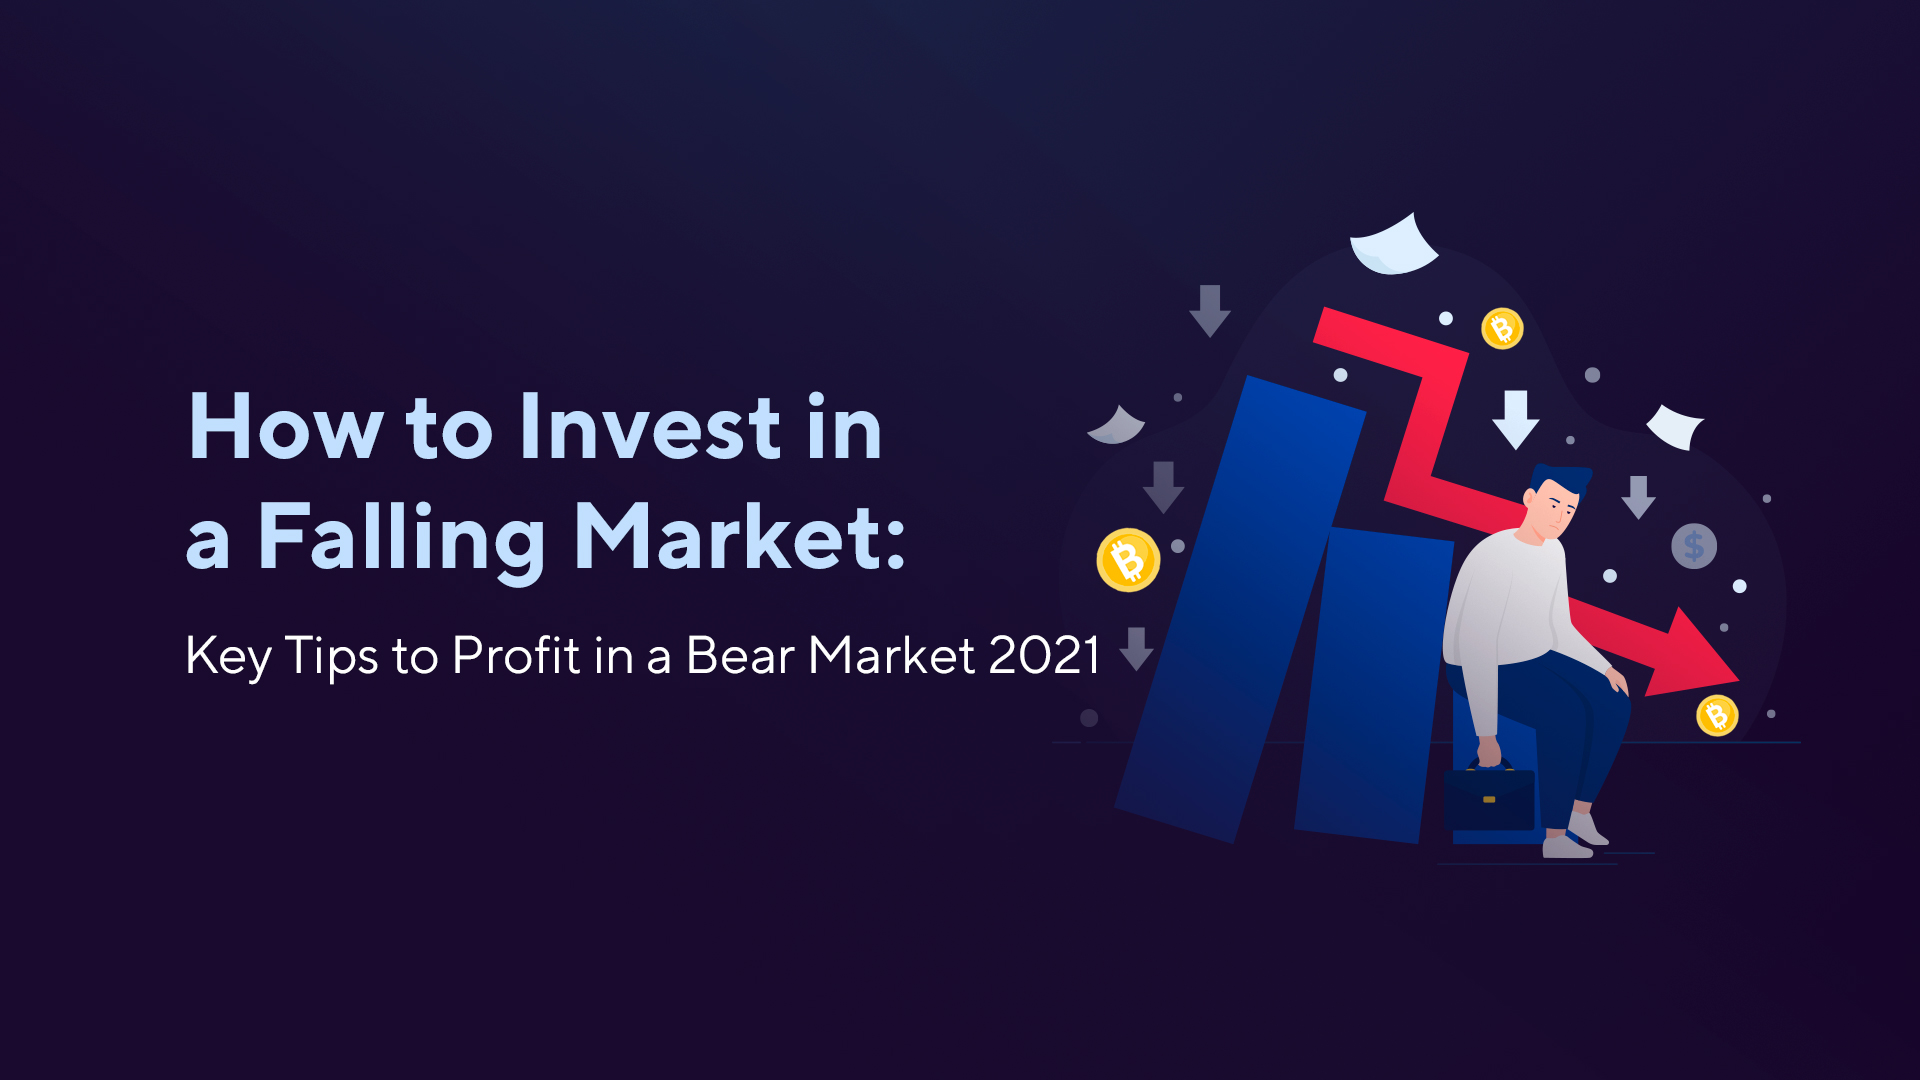 How to Invest in a Falling Market: Key Tips to Profit in a Bear Market 2022